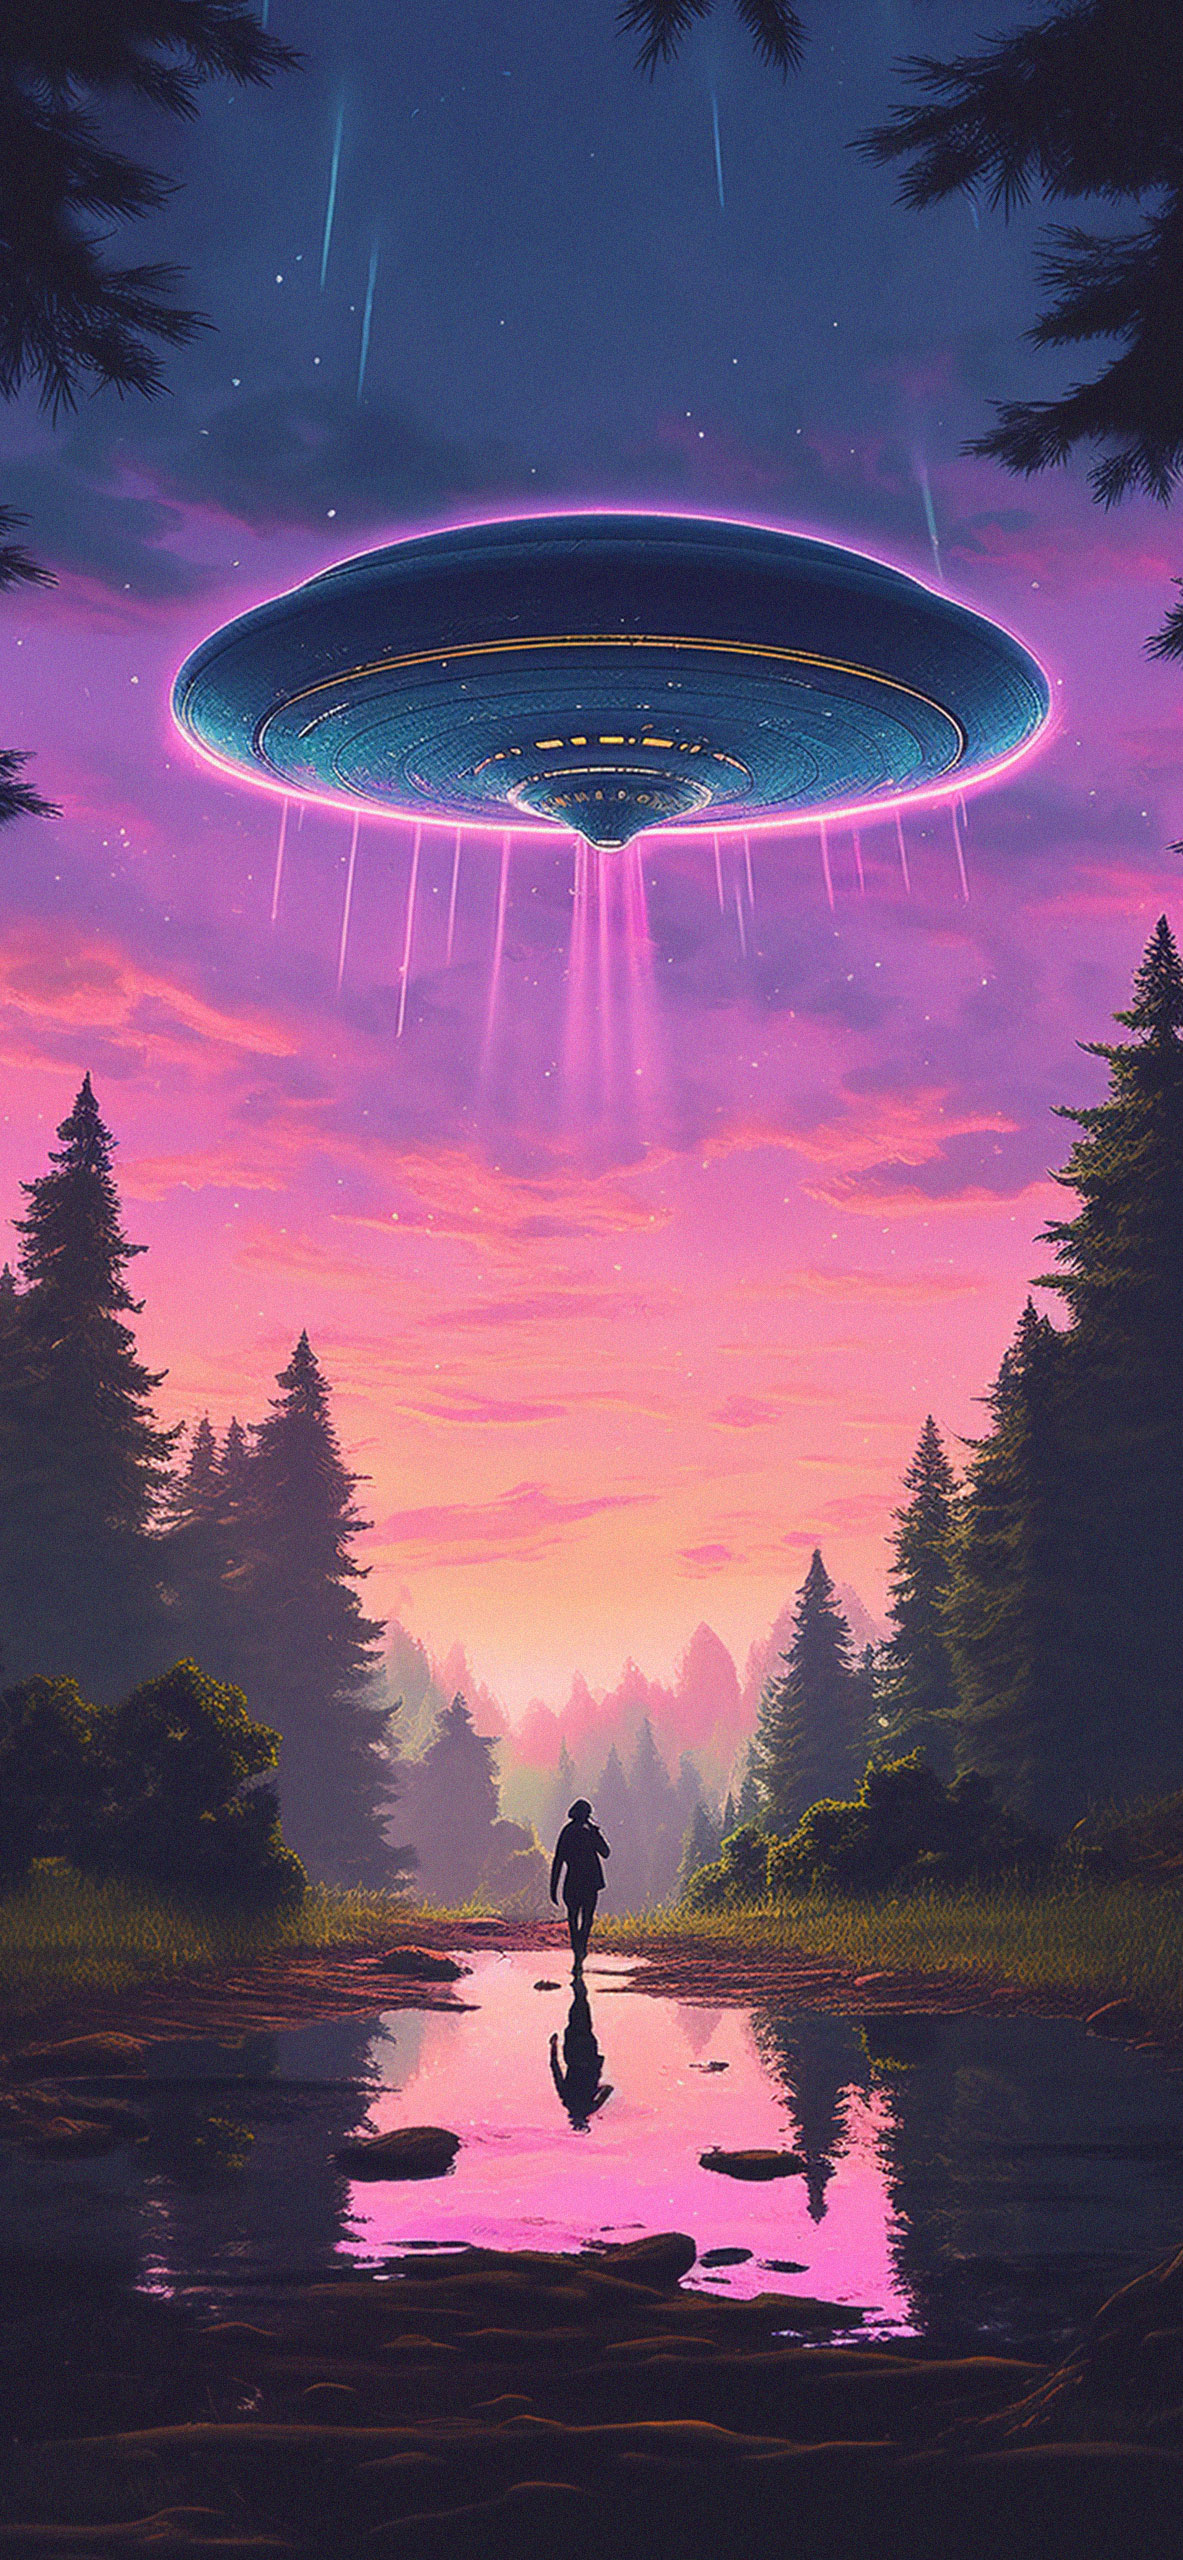 UFO above the forest art wallpaper UFO art wallpaper for iPhon